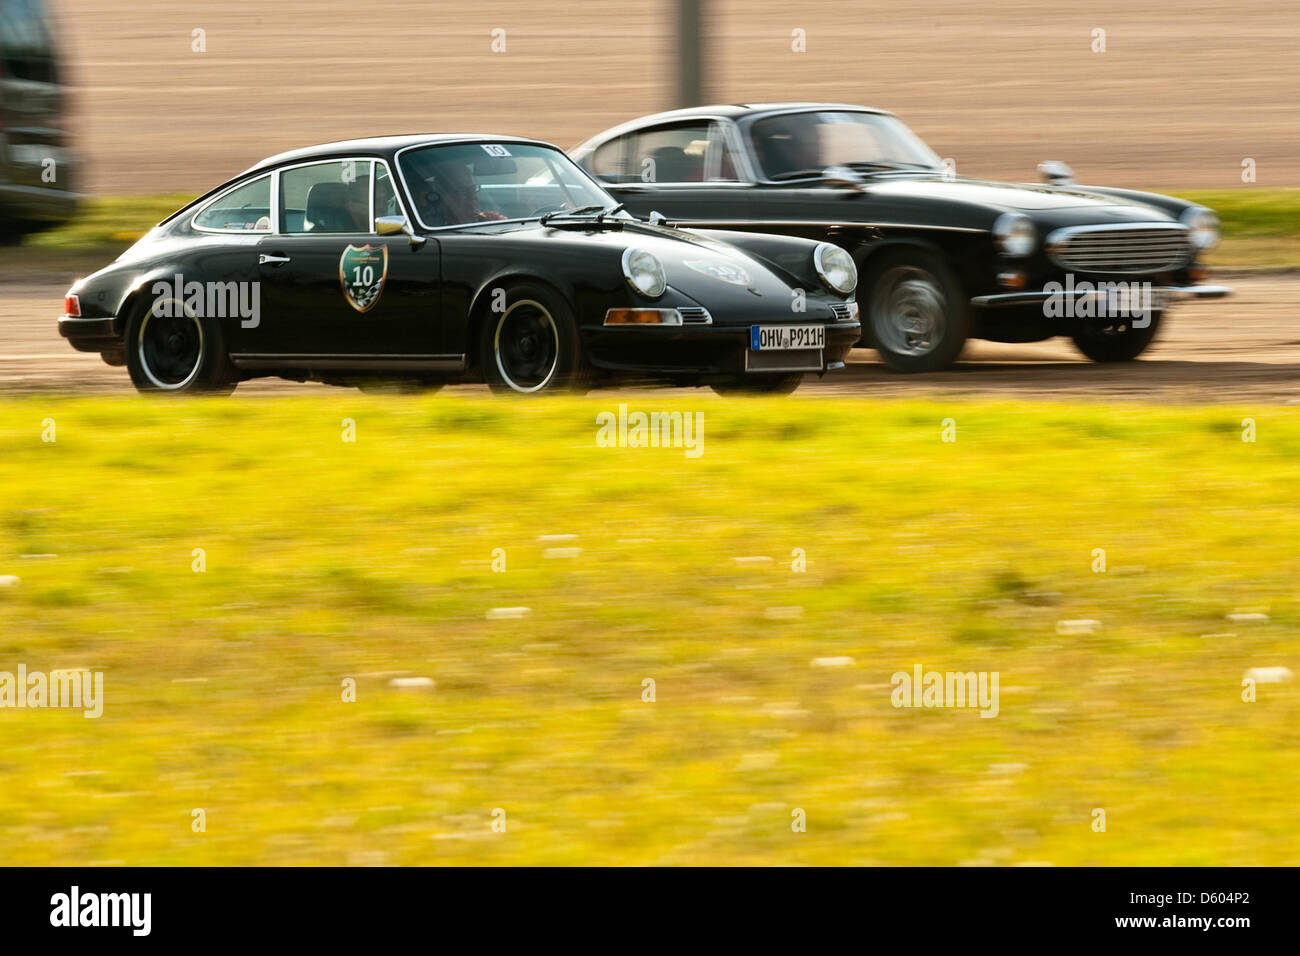 A Porsche 911 E (l) and a Volvo P 1800 are pictured during the Oldtimer Rallye 'Revival Berlin' at Trabrennbahn Mariendorf in Berlin, Germany, 10 November 2012. More than 50 historical automobiles compete for highest speed, some of them are piloted by former motor sportsmen. Photo: Robert Schlesinger Stock Photo